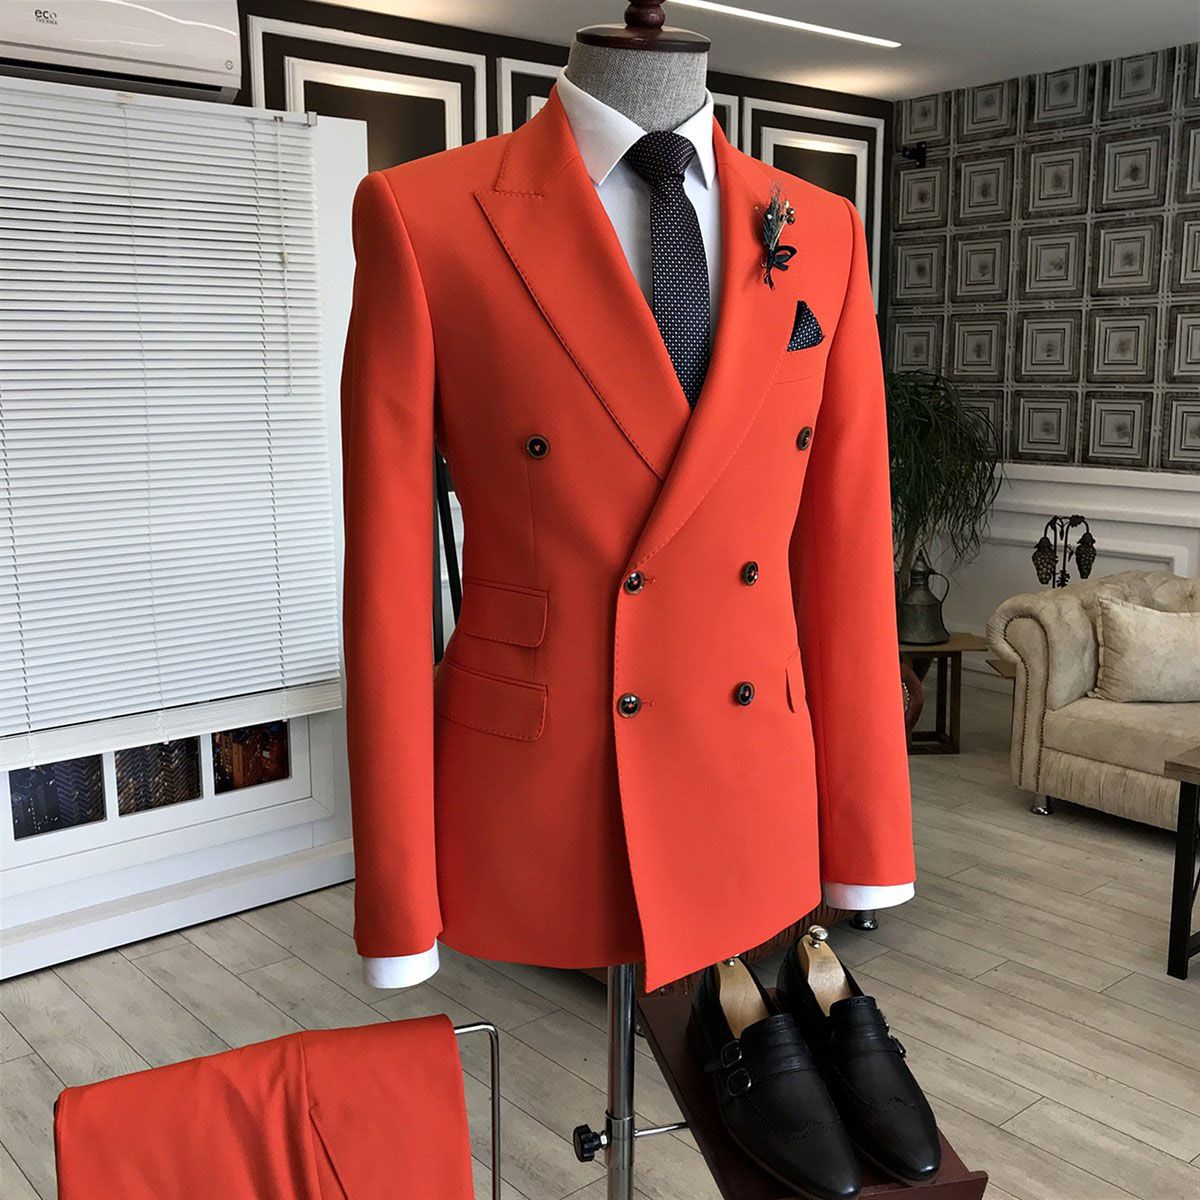 Gentle Red Best Party Suit for Prom with Peaked Lapel and Double Breasted-Prom Suits-BallBride